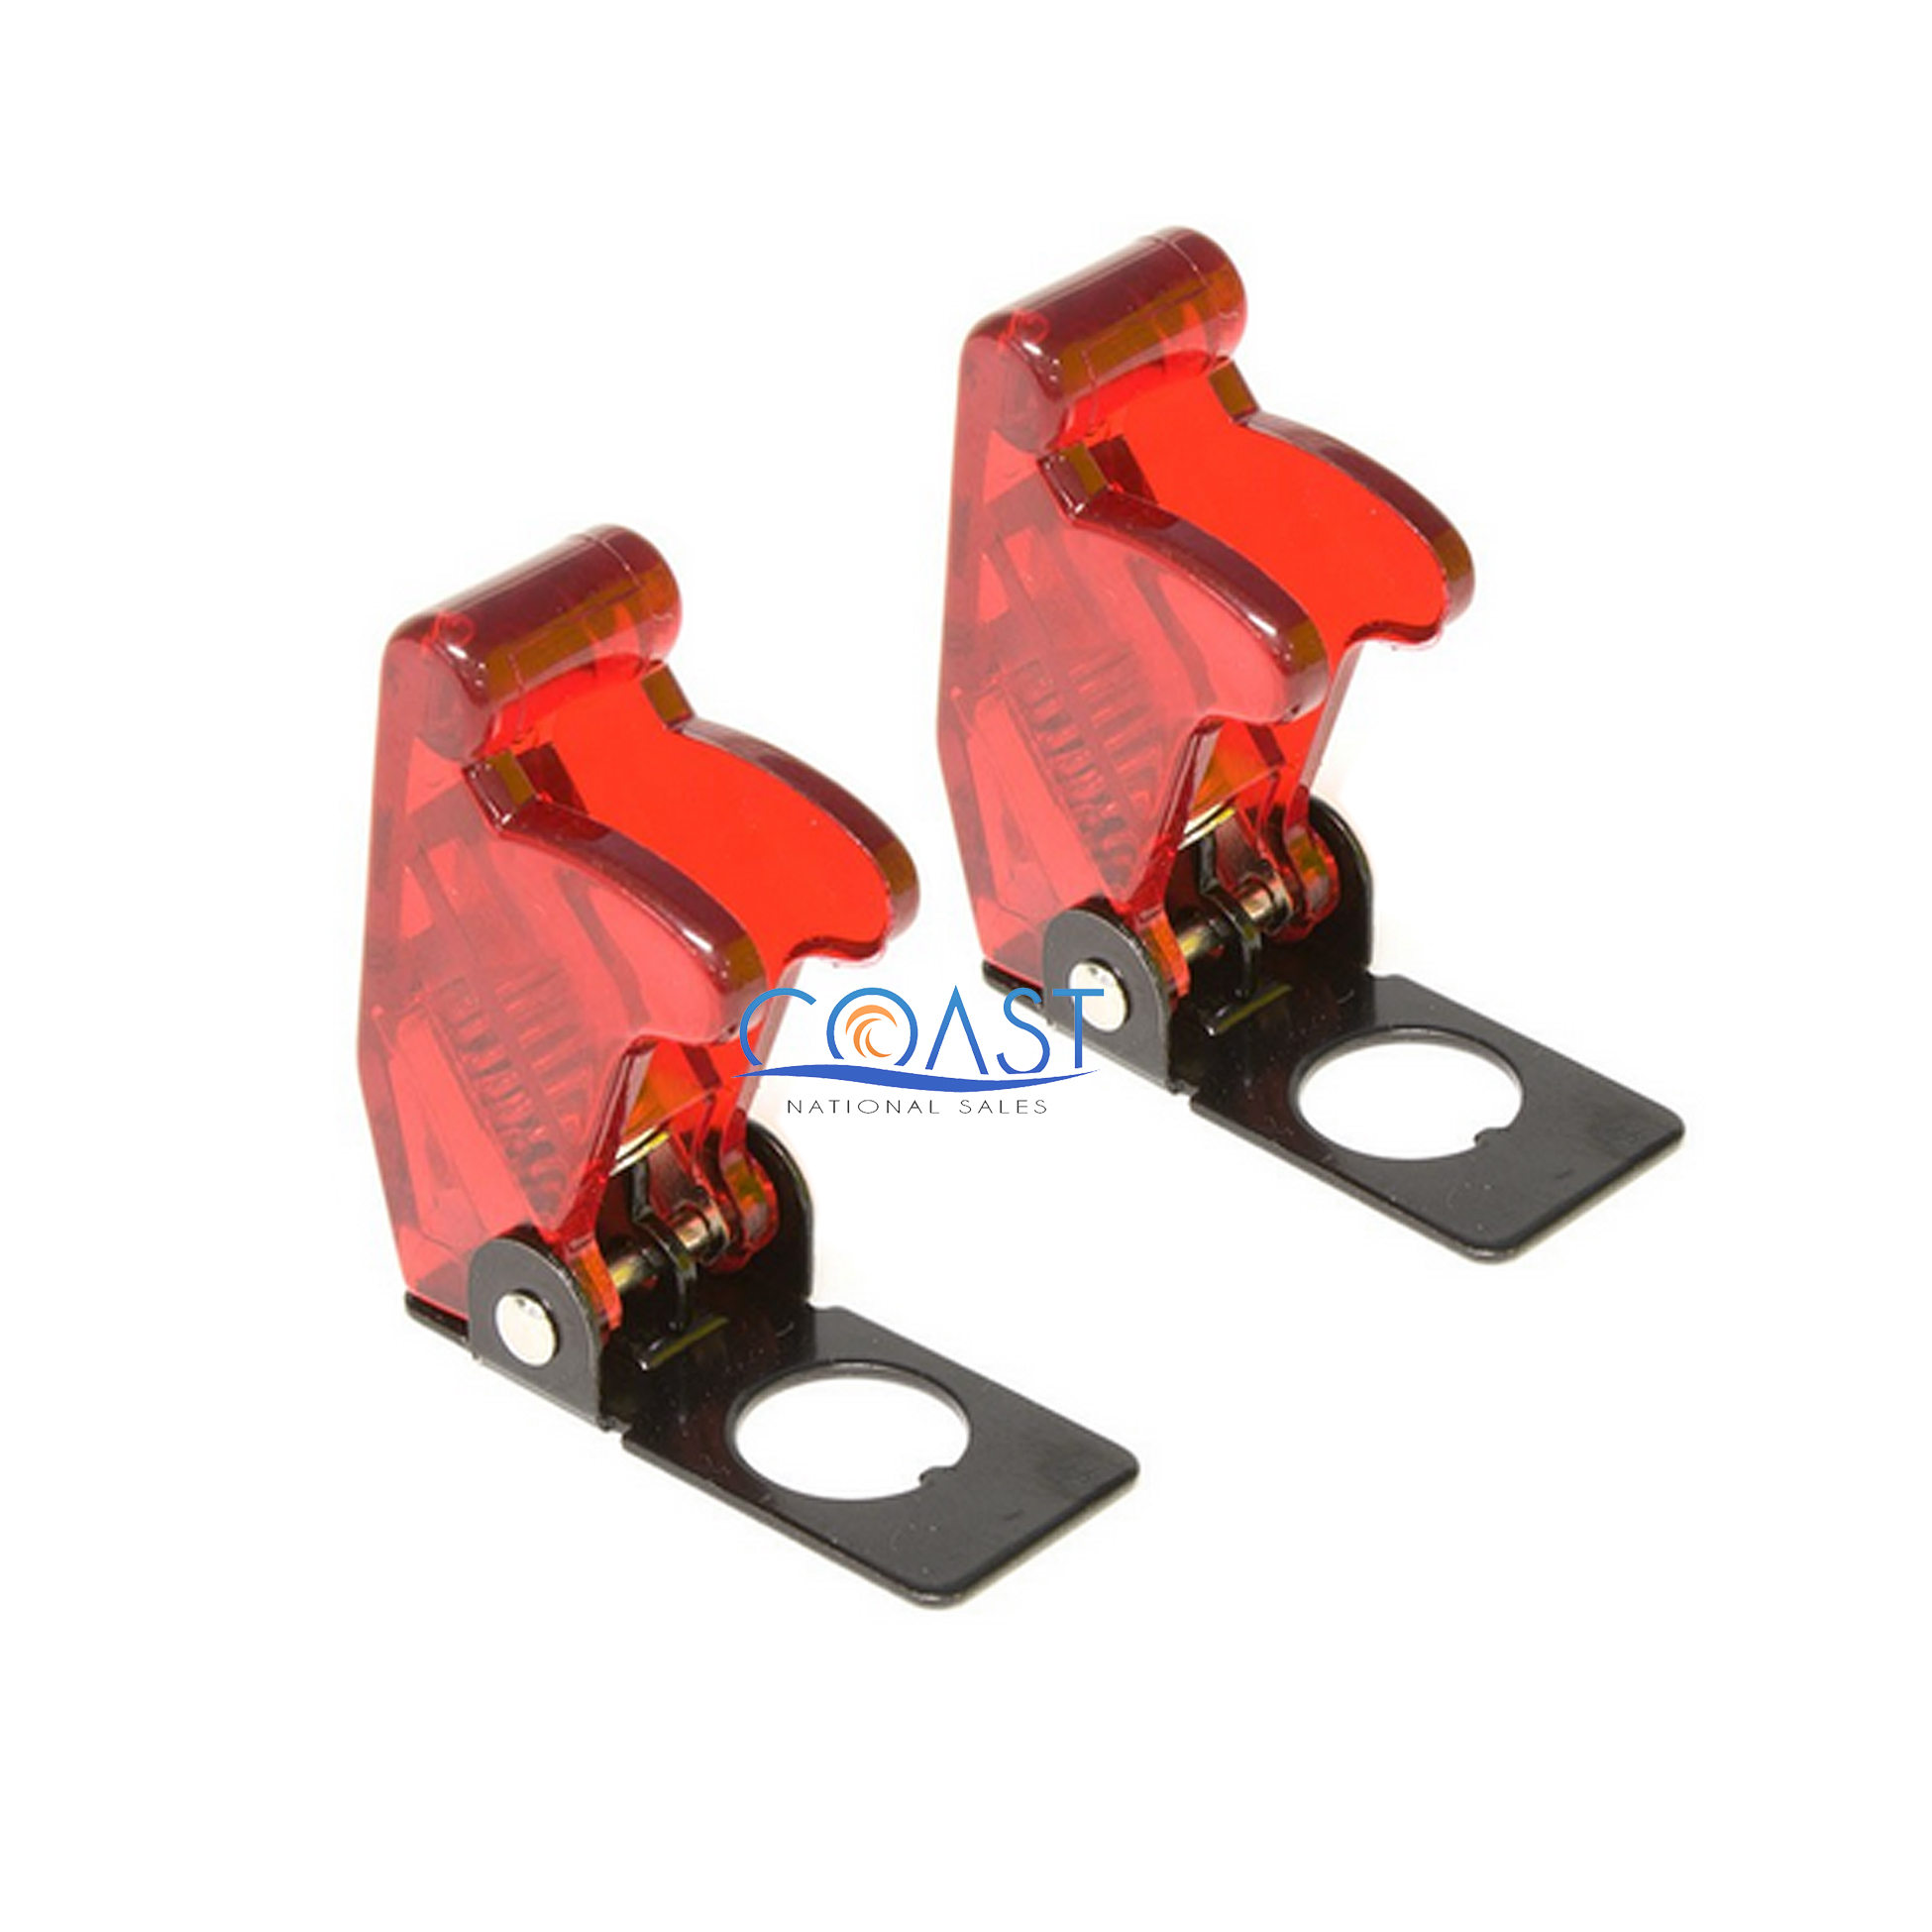 2x Car Marine Industrial Spring Loaded Toggle Switch Safety Cover